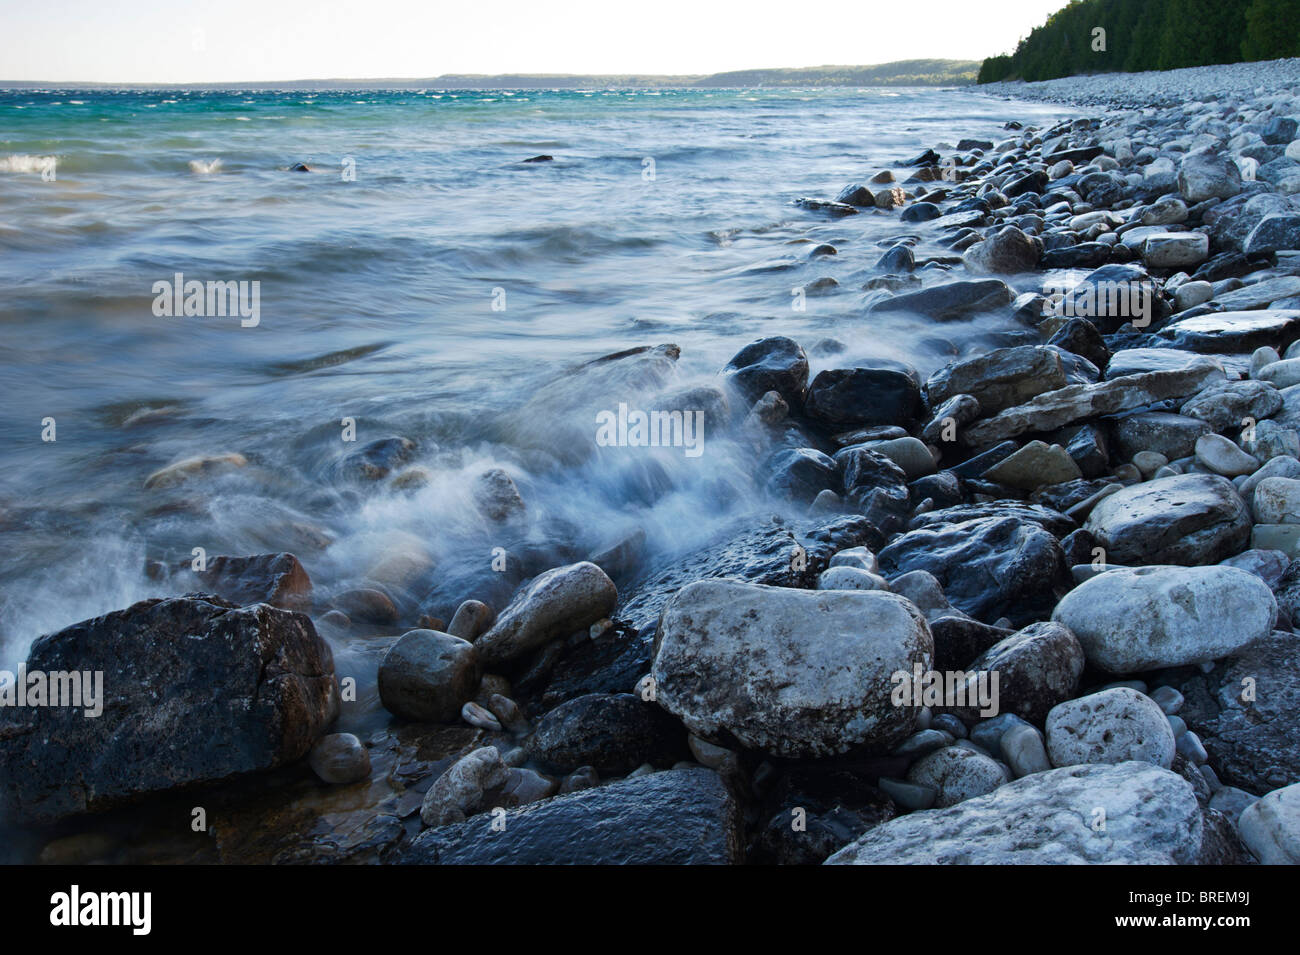 Waves of Georgian Bay meet the rocky shores at Dyer's Bay on the Bruce Peninsula. Stock Photo